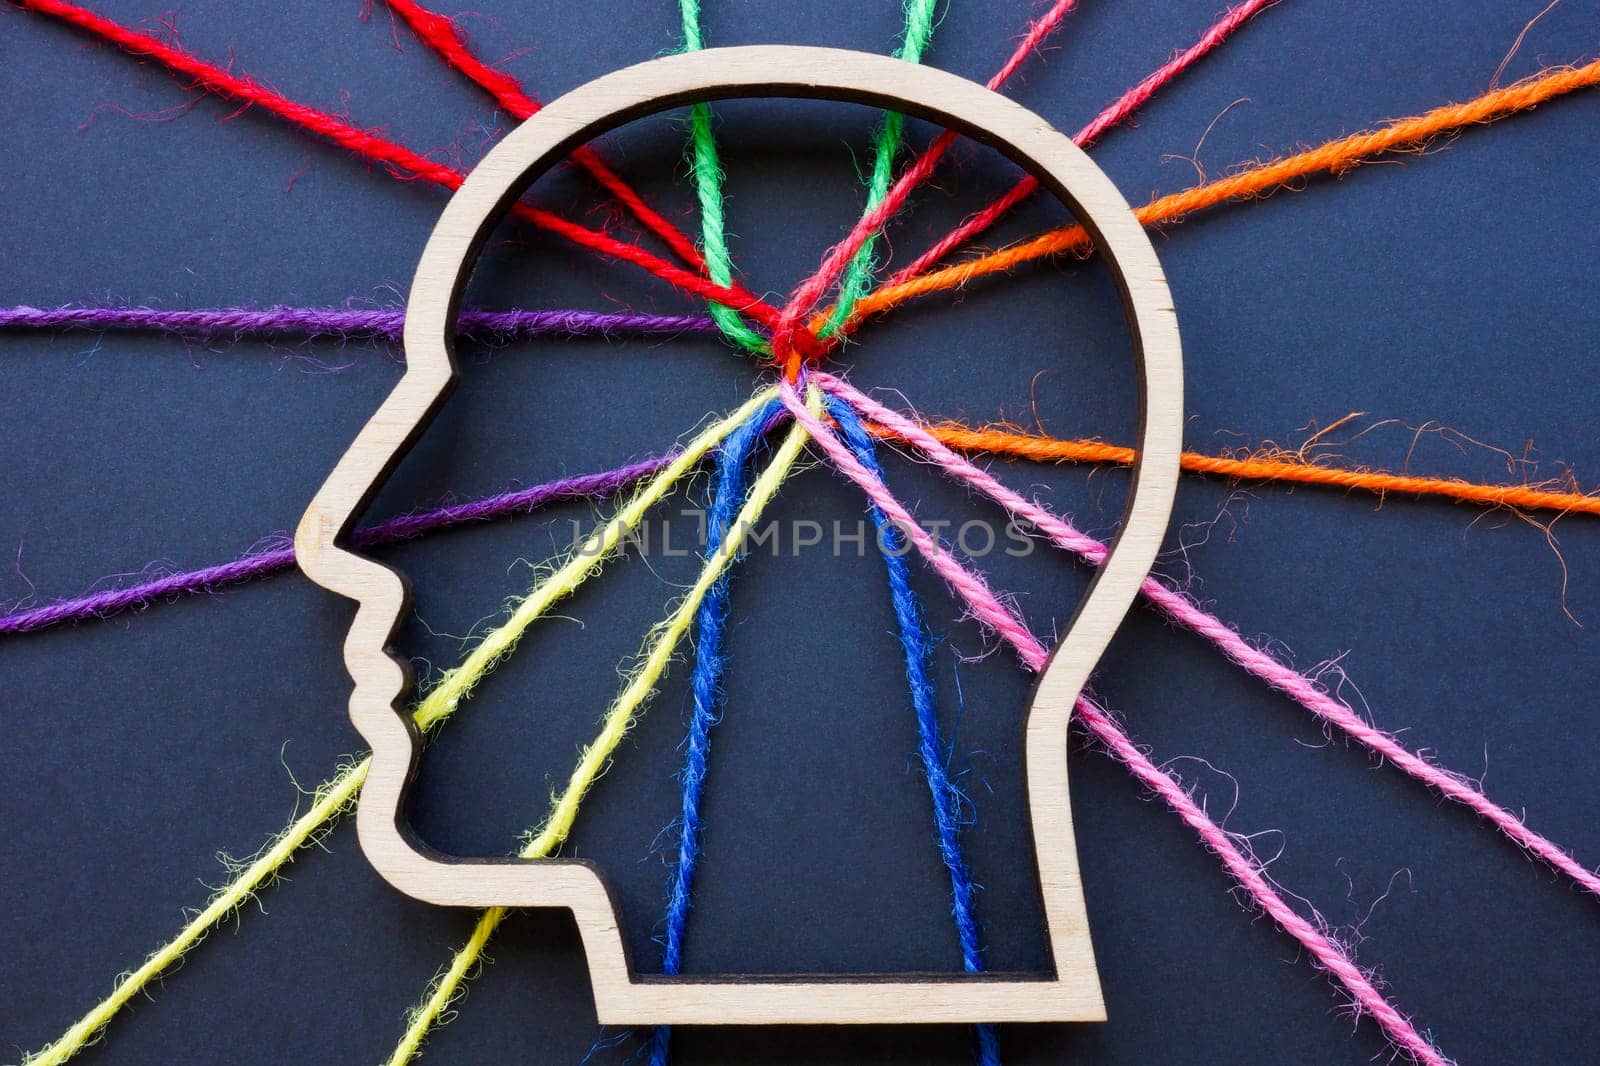 The outline of head and connected colored threads symbolize neurodiversity, autism or creativity.